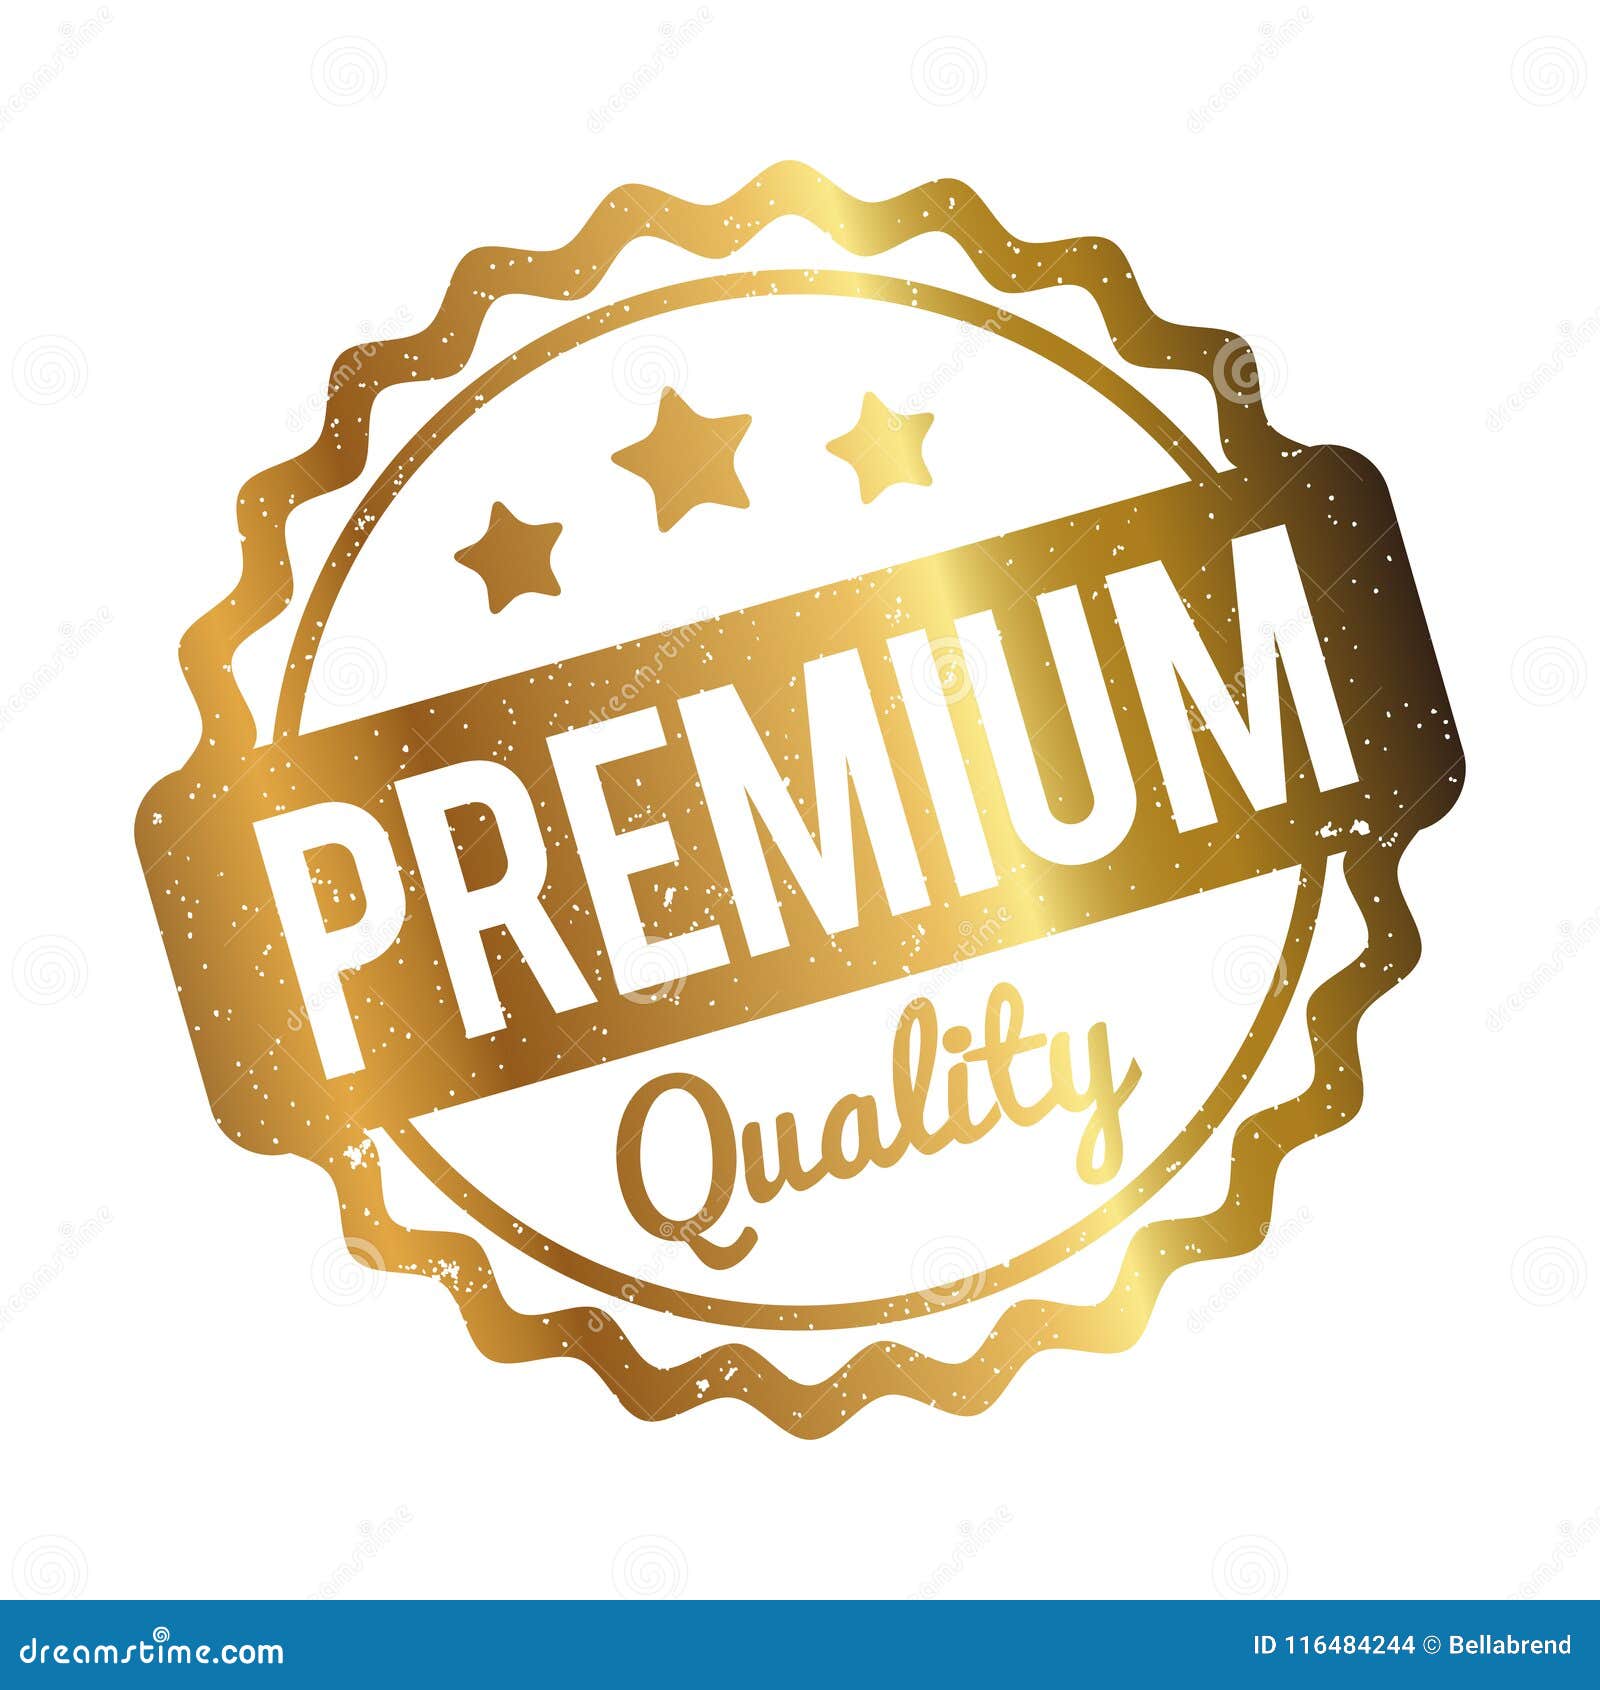 https://thumbs.dreamstime.com/z/premium-quality-rubber-stamp-gold-white-background-vector-graphics-premium-quality-rubber-stamp-gold-white-background-116484244.jpg